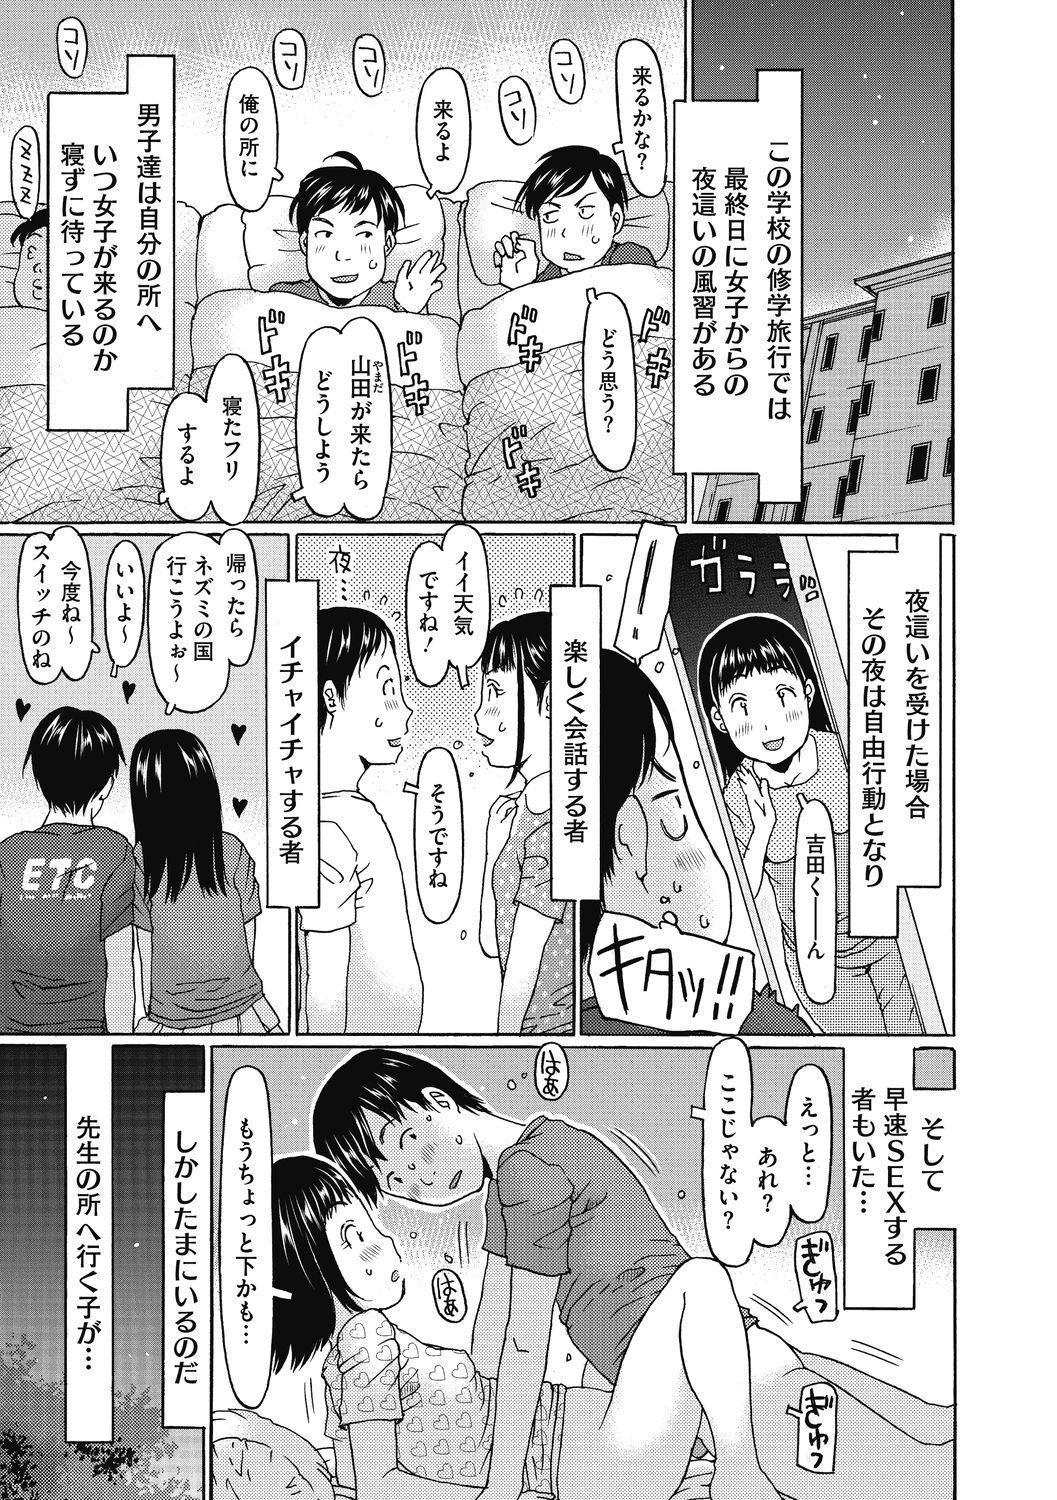 Housewife Little Girl Strike Vol. 15 Mamada - Page 3